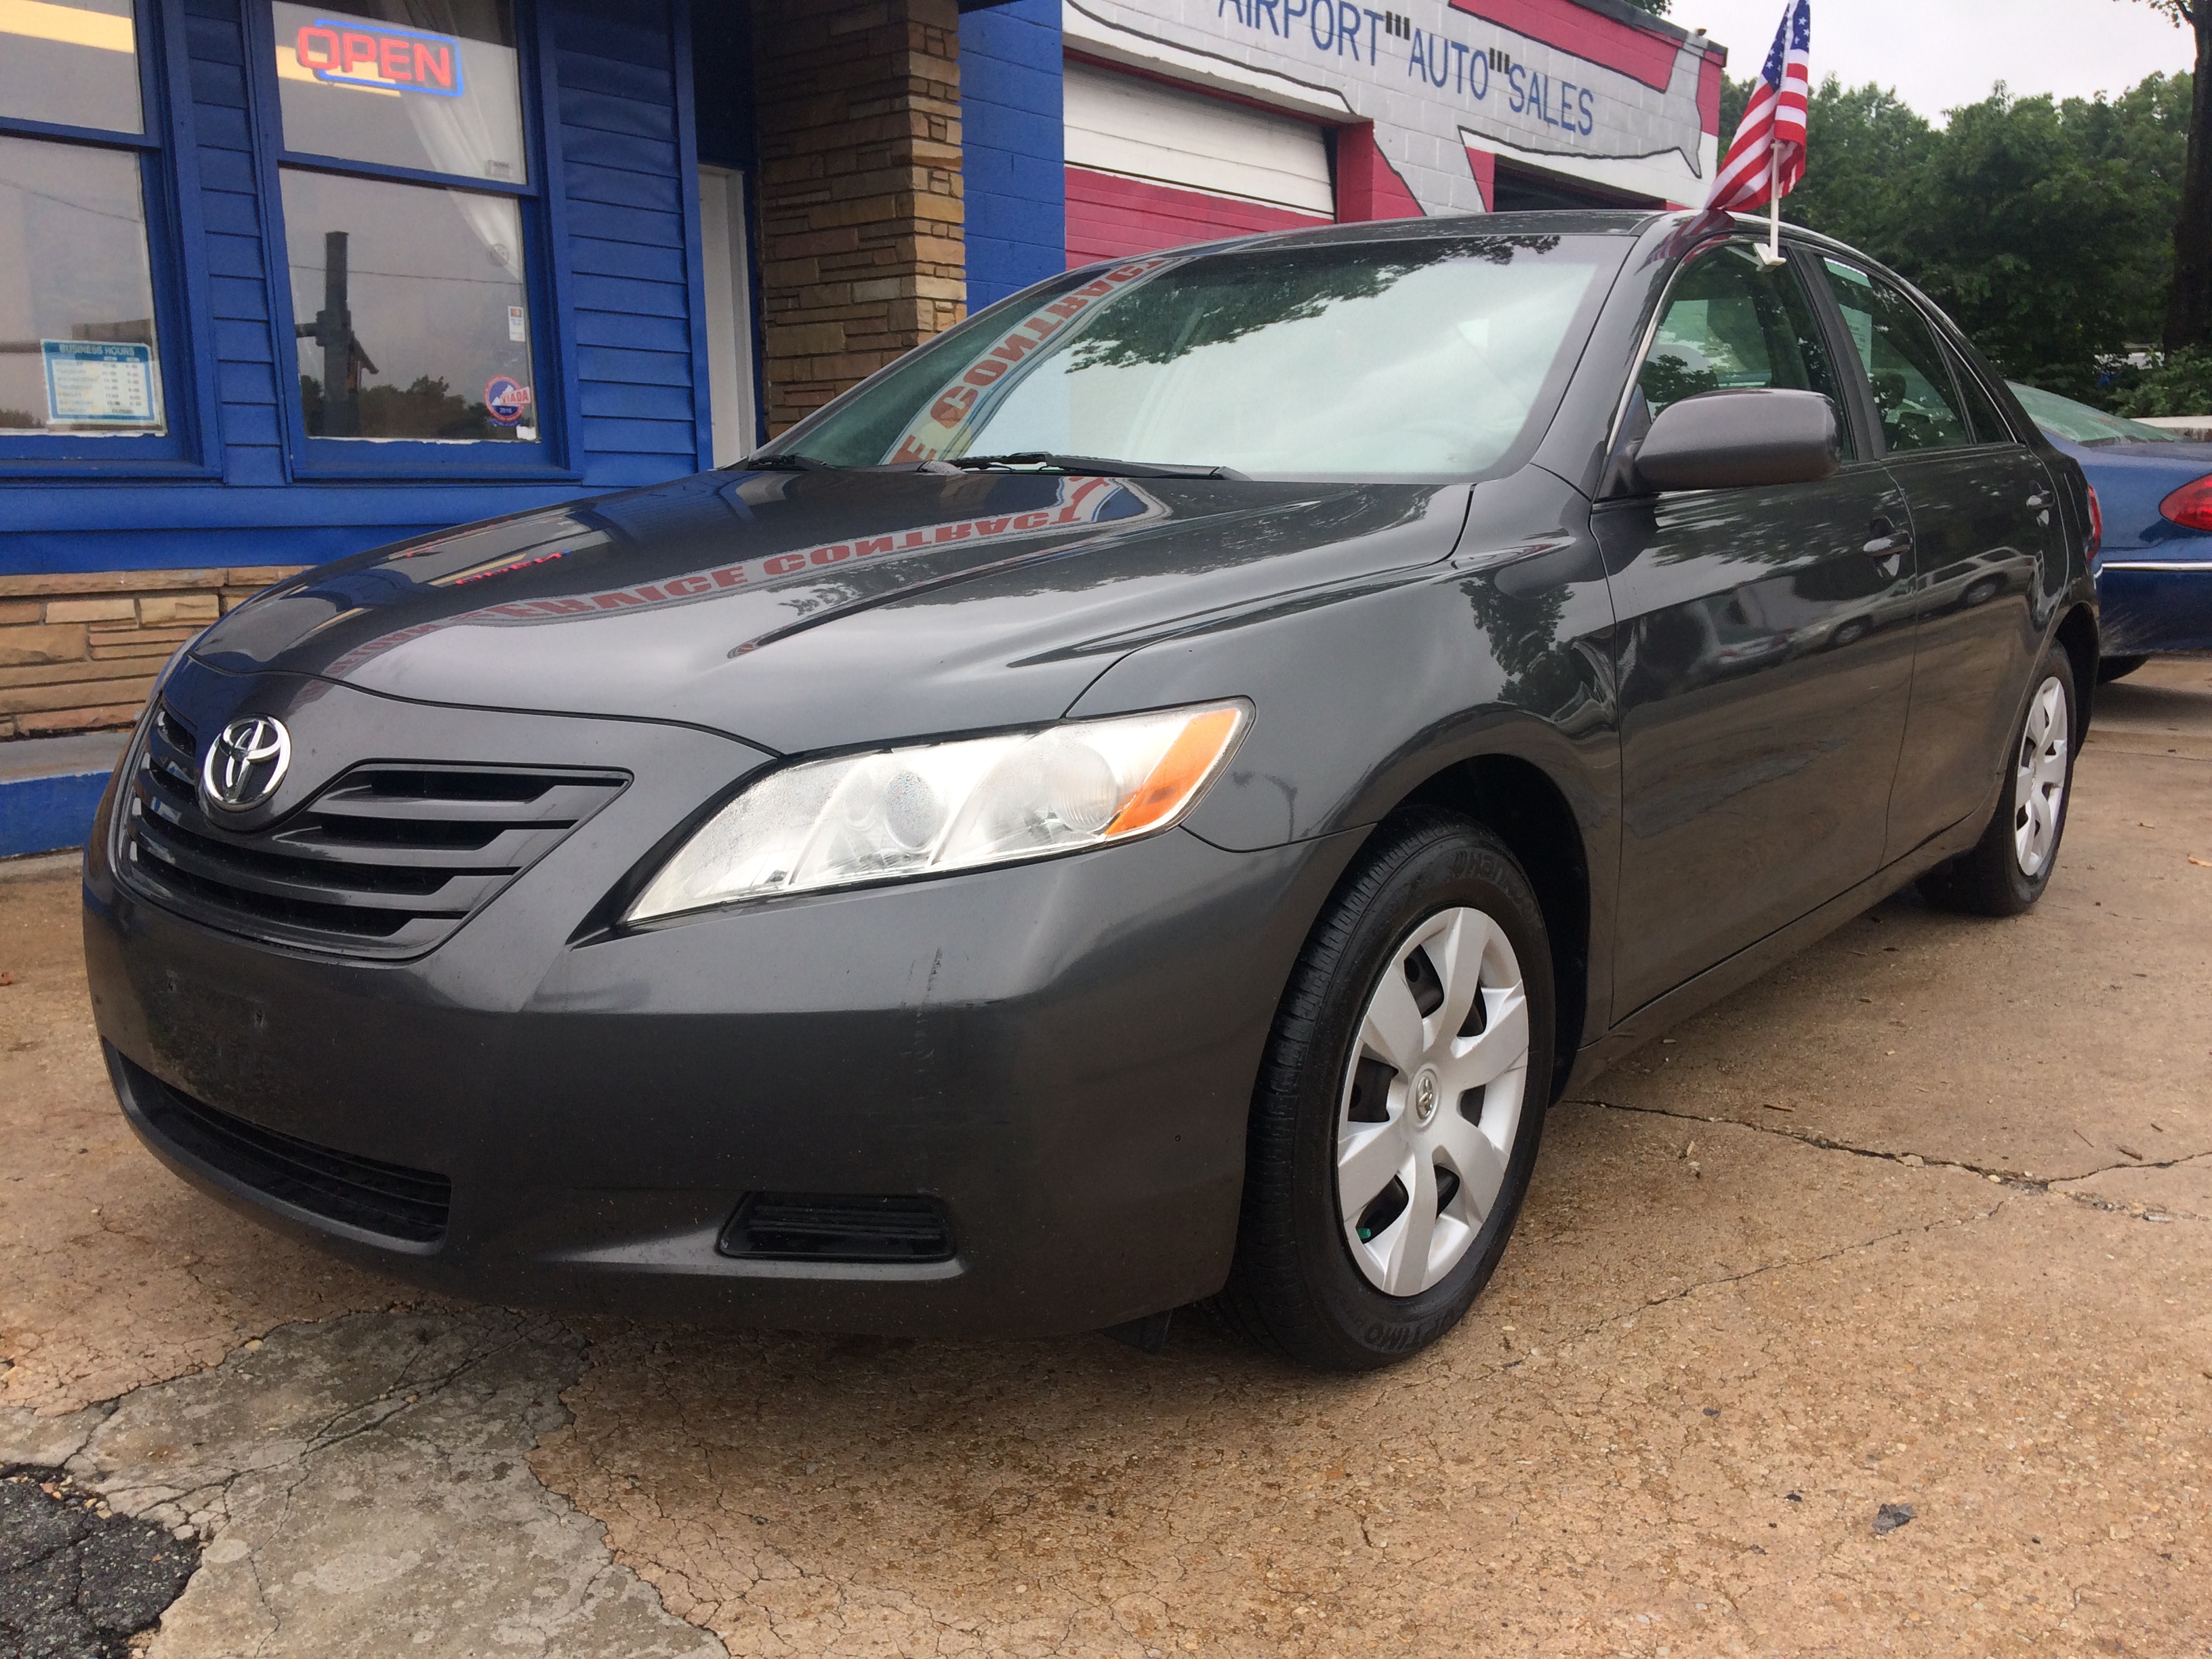 2007 Toyota Camry CE, Airport Auto Sales Used Cars for Sale, VA.